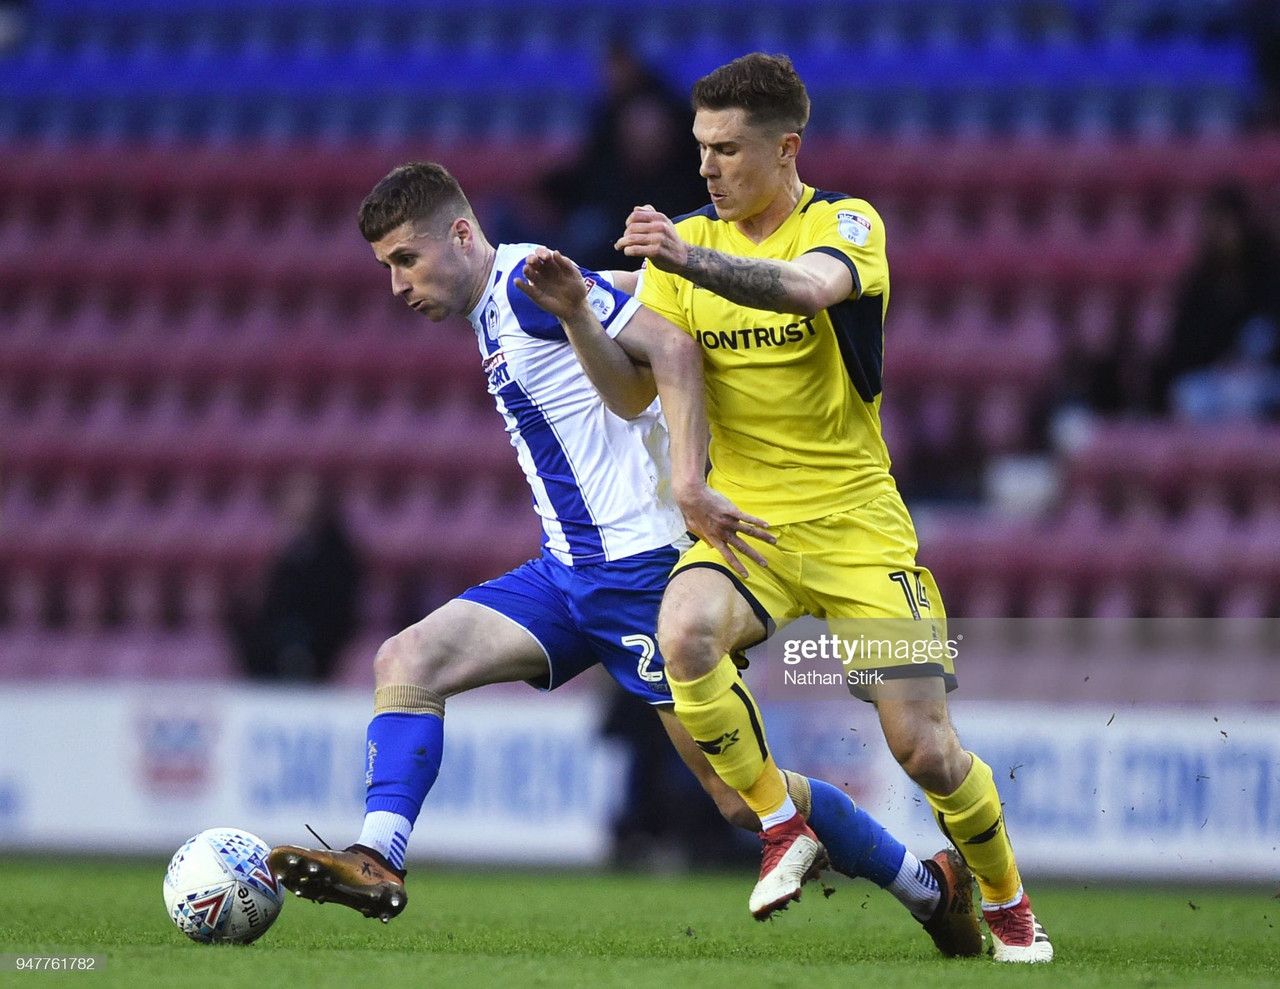 Oxford United vs Wigan Athletic Preview: How to watch, kick-off time, team news, predicted lineups and ones to watch